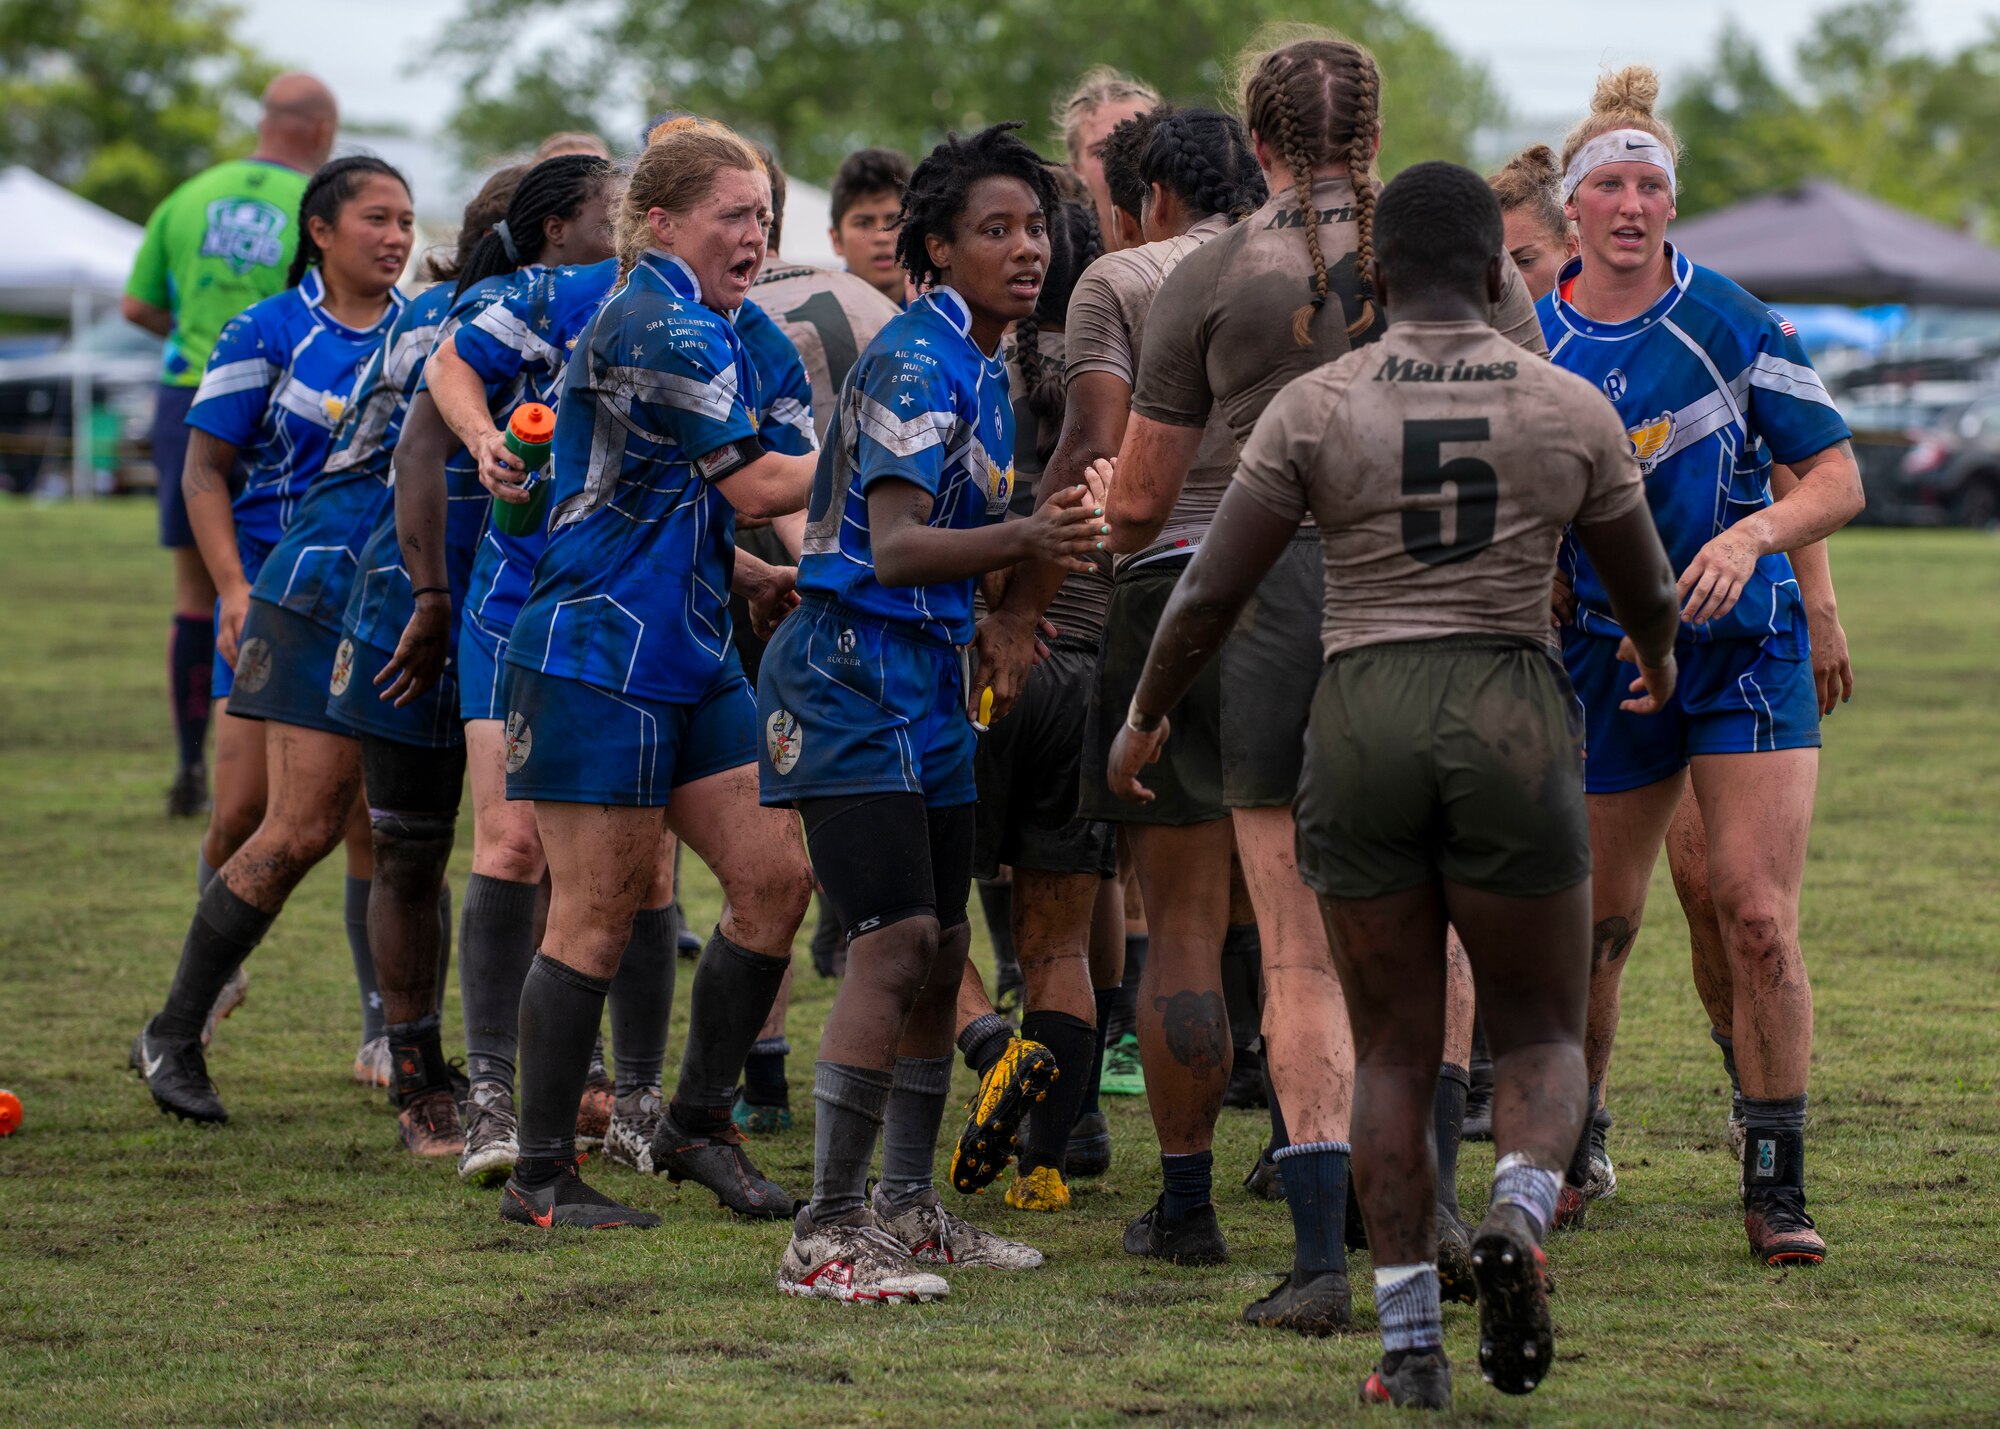 Members of the United States Air Force and Marine women’s rugby teams shake hands after a game at the Annual Armed Forces Women’s Rugby Championship in Wilmington, North Carolina, June 26, 2021.